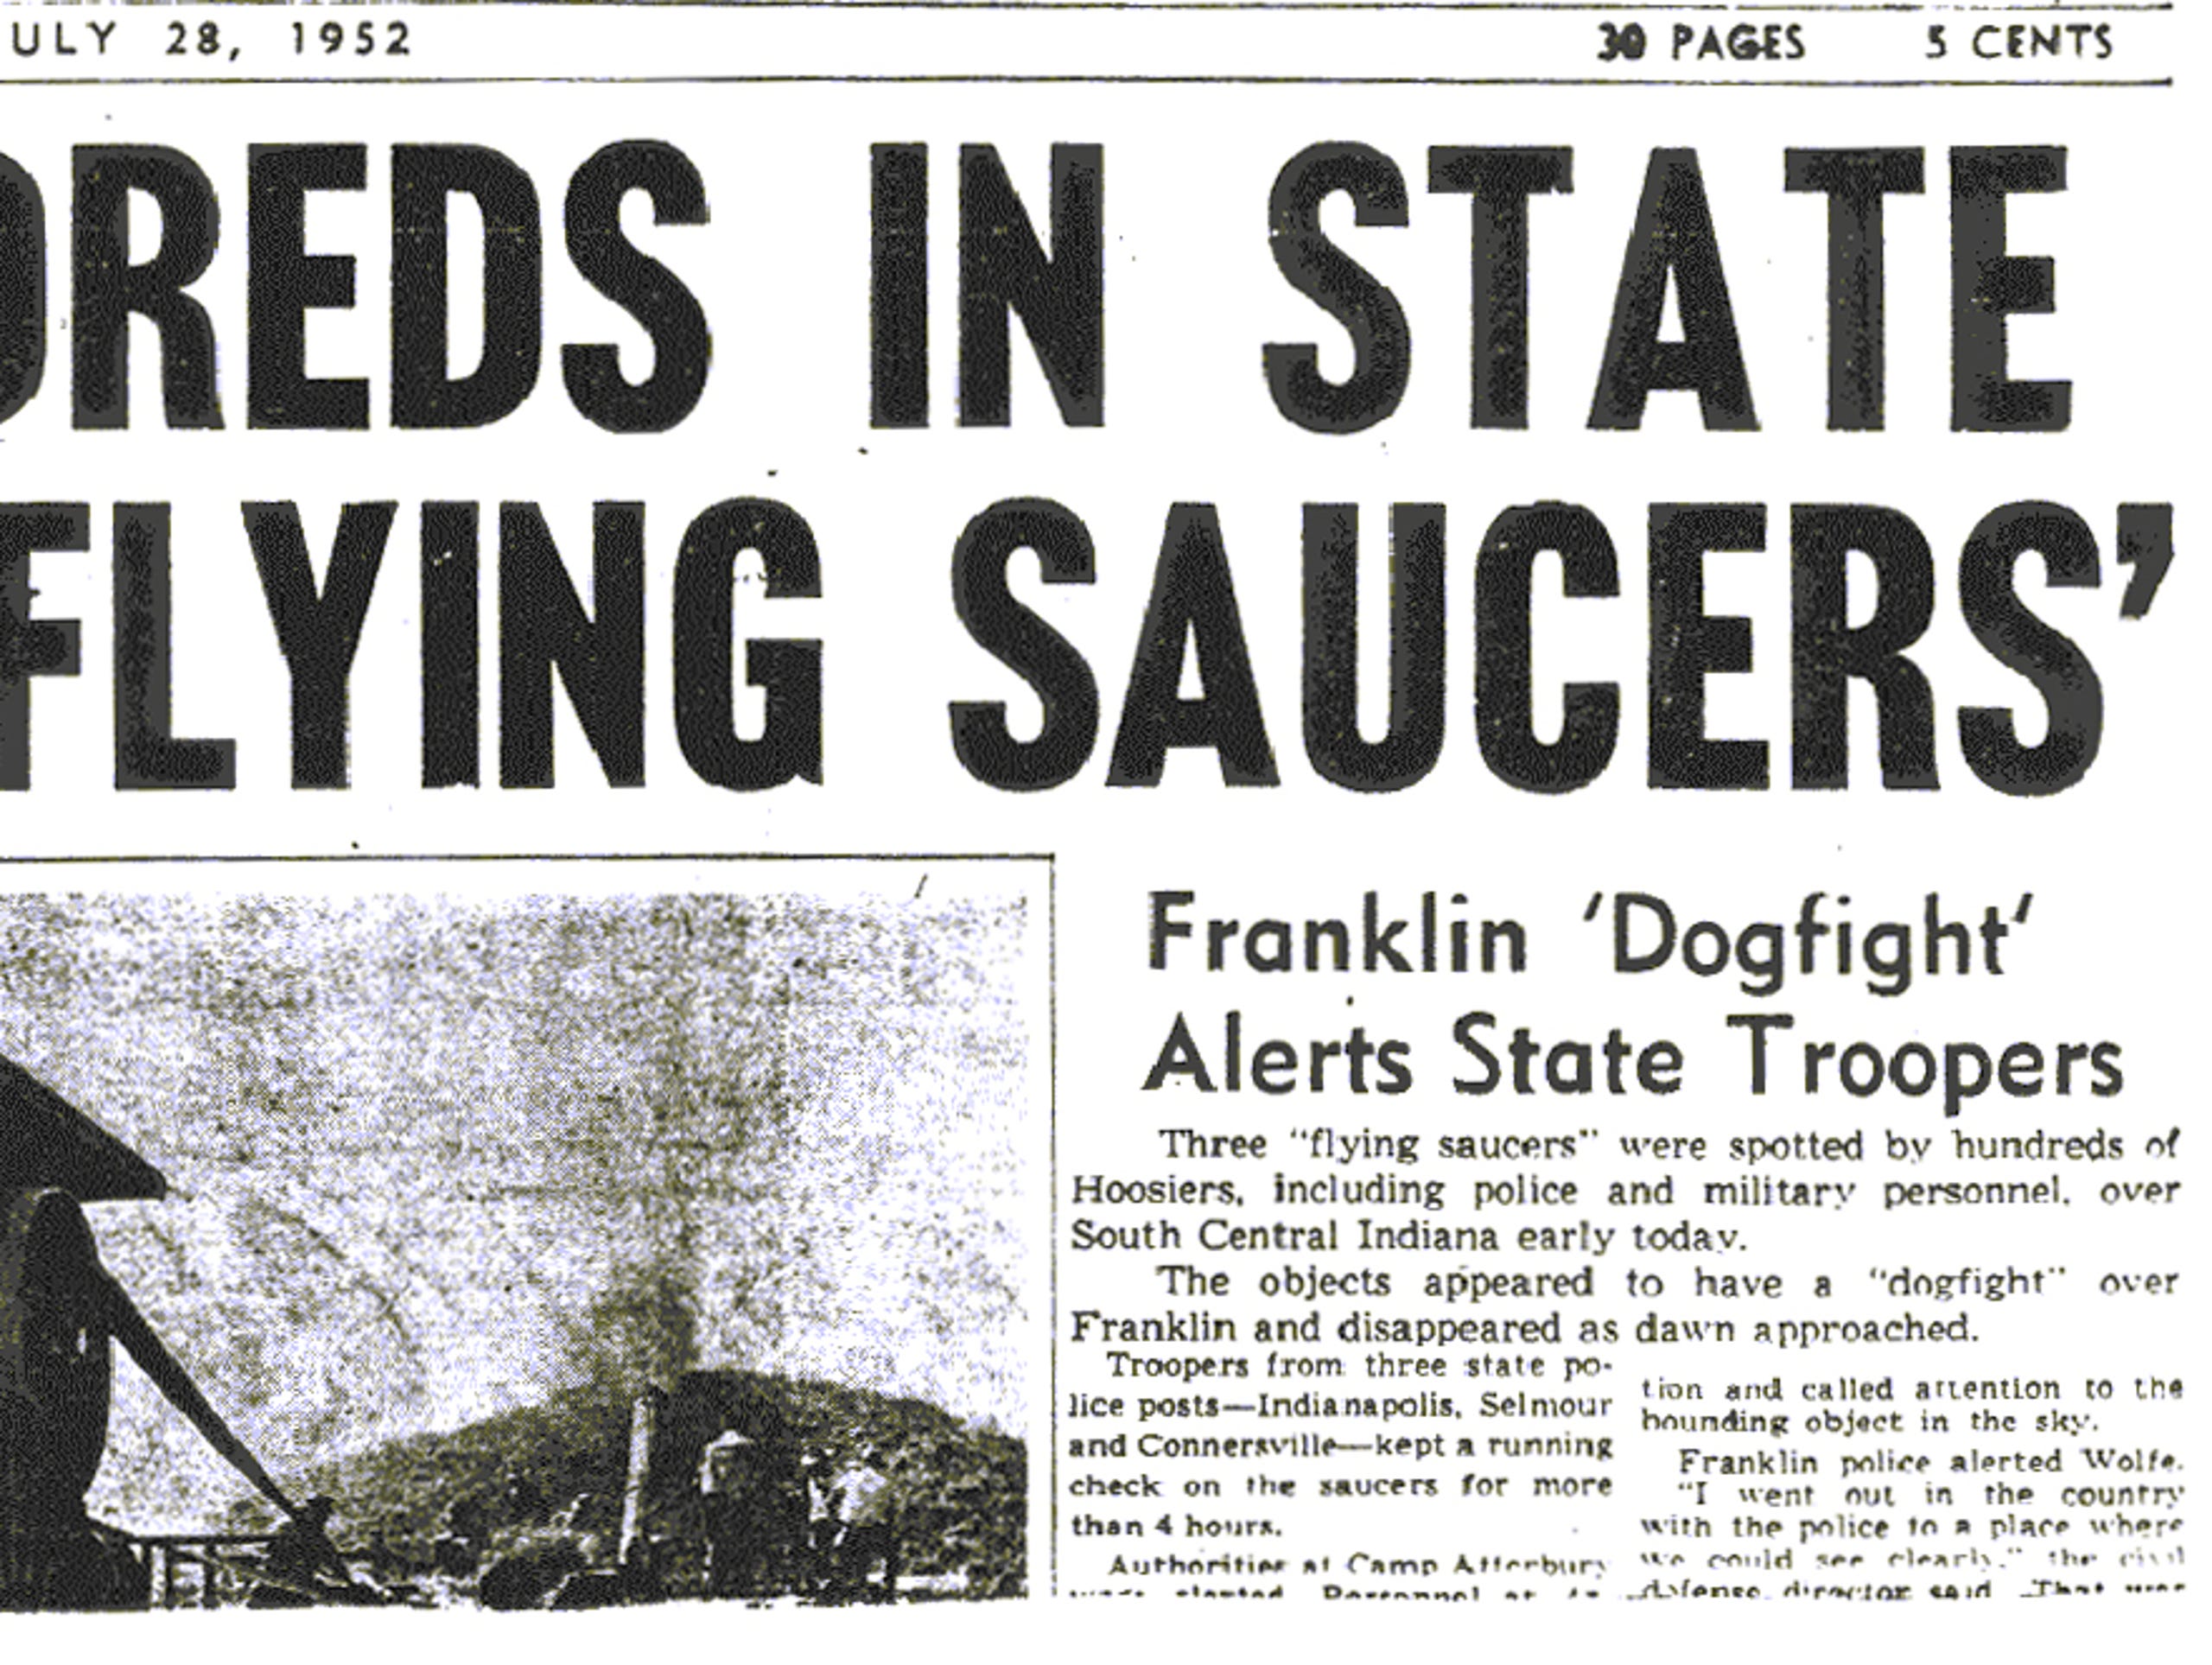 July 28, 1952 Indianapolis News report on "alien activity".